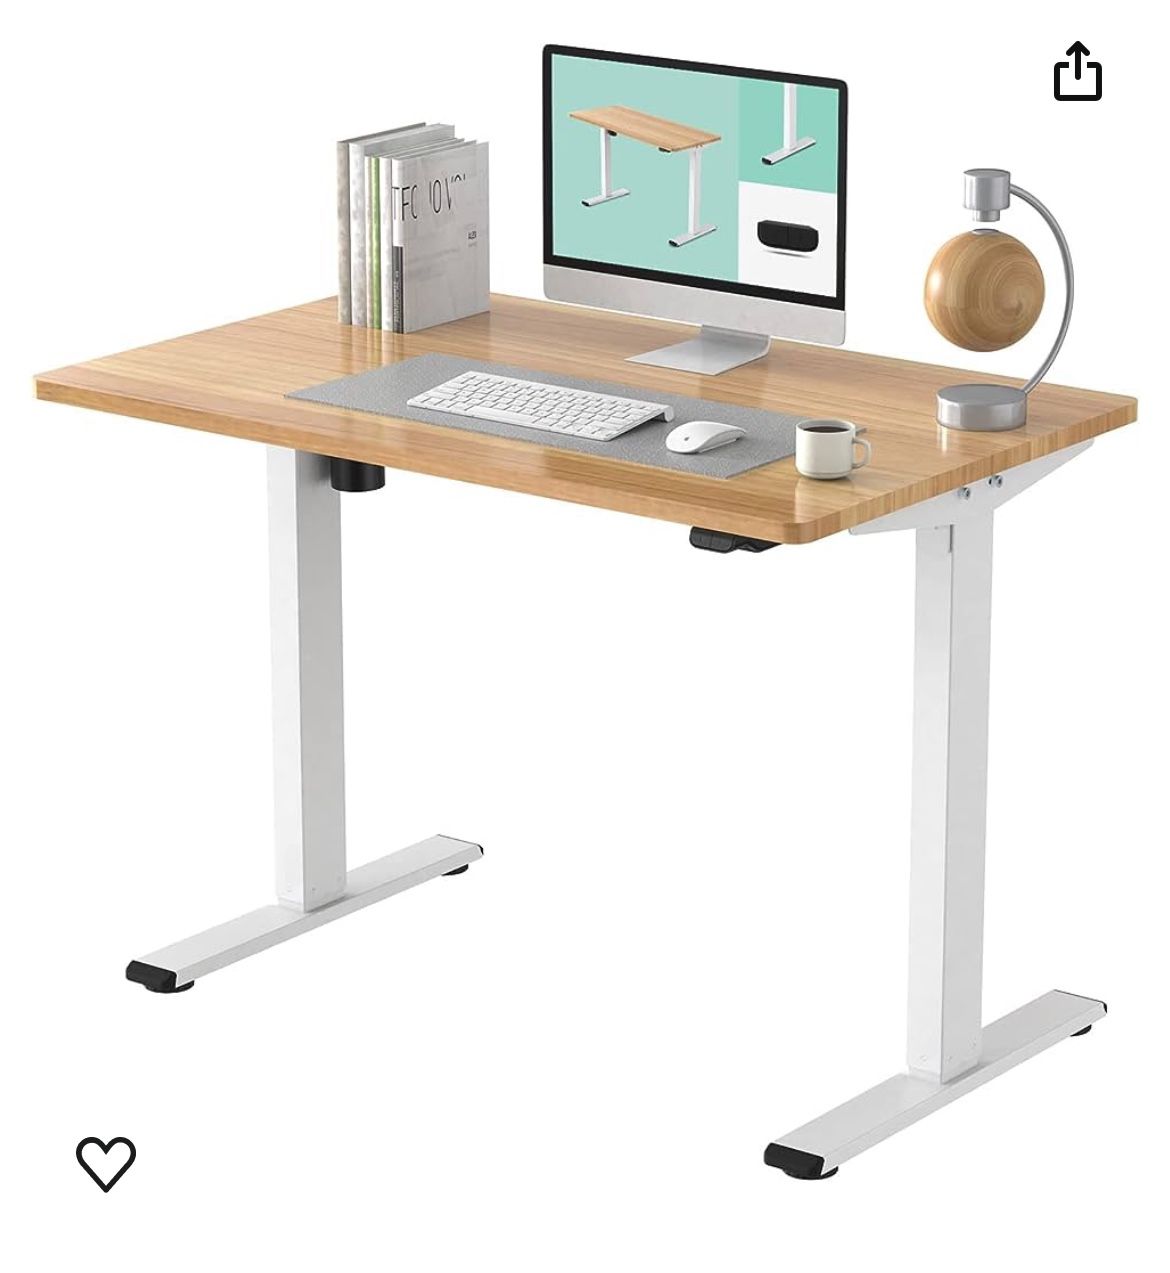 Desk - Sit or stand